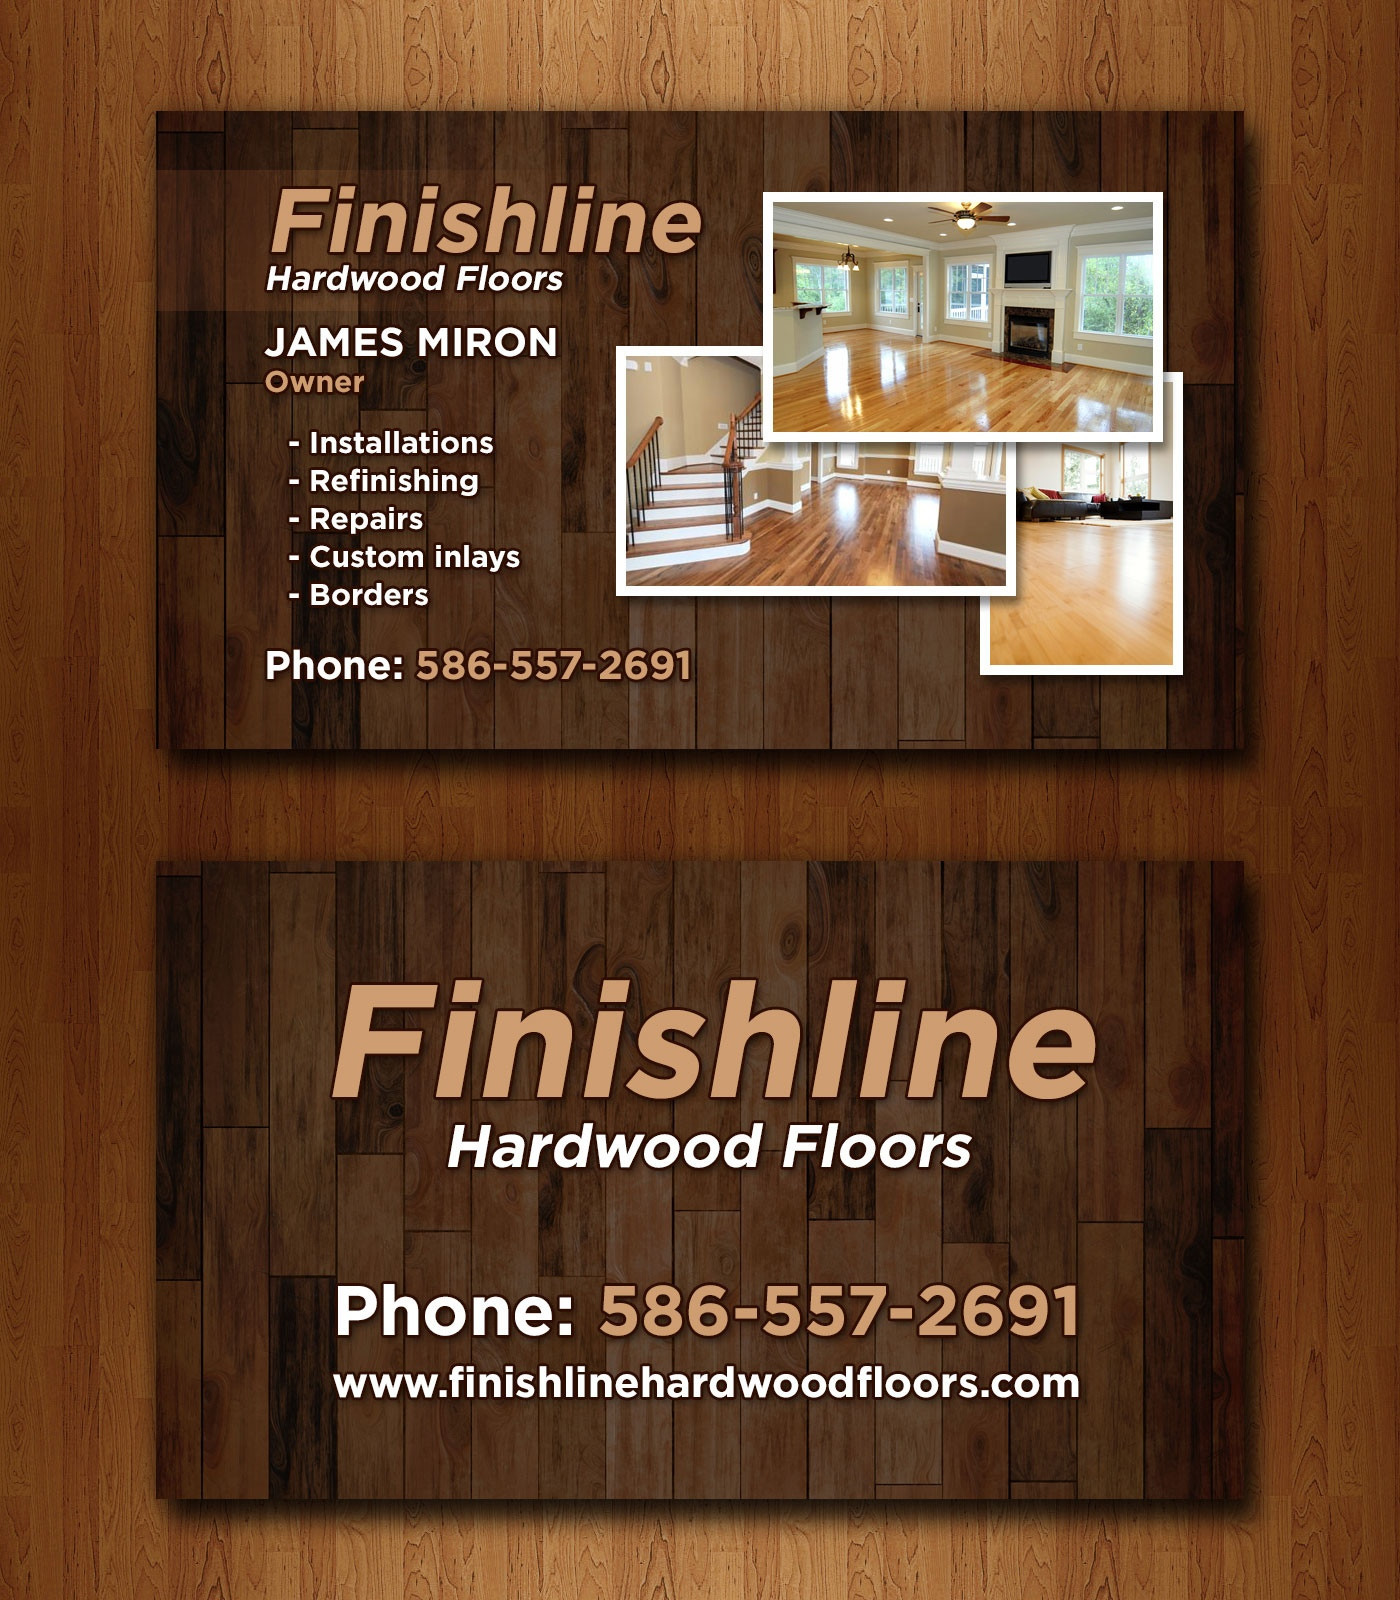 hardwood flooring business card template of 35 fresh business cards custom example of coloring page within business cards custom inspirational flooring business cards 5 custom designs on pil